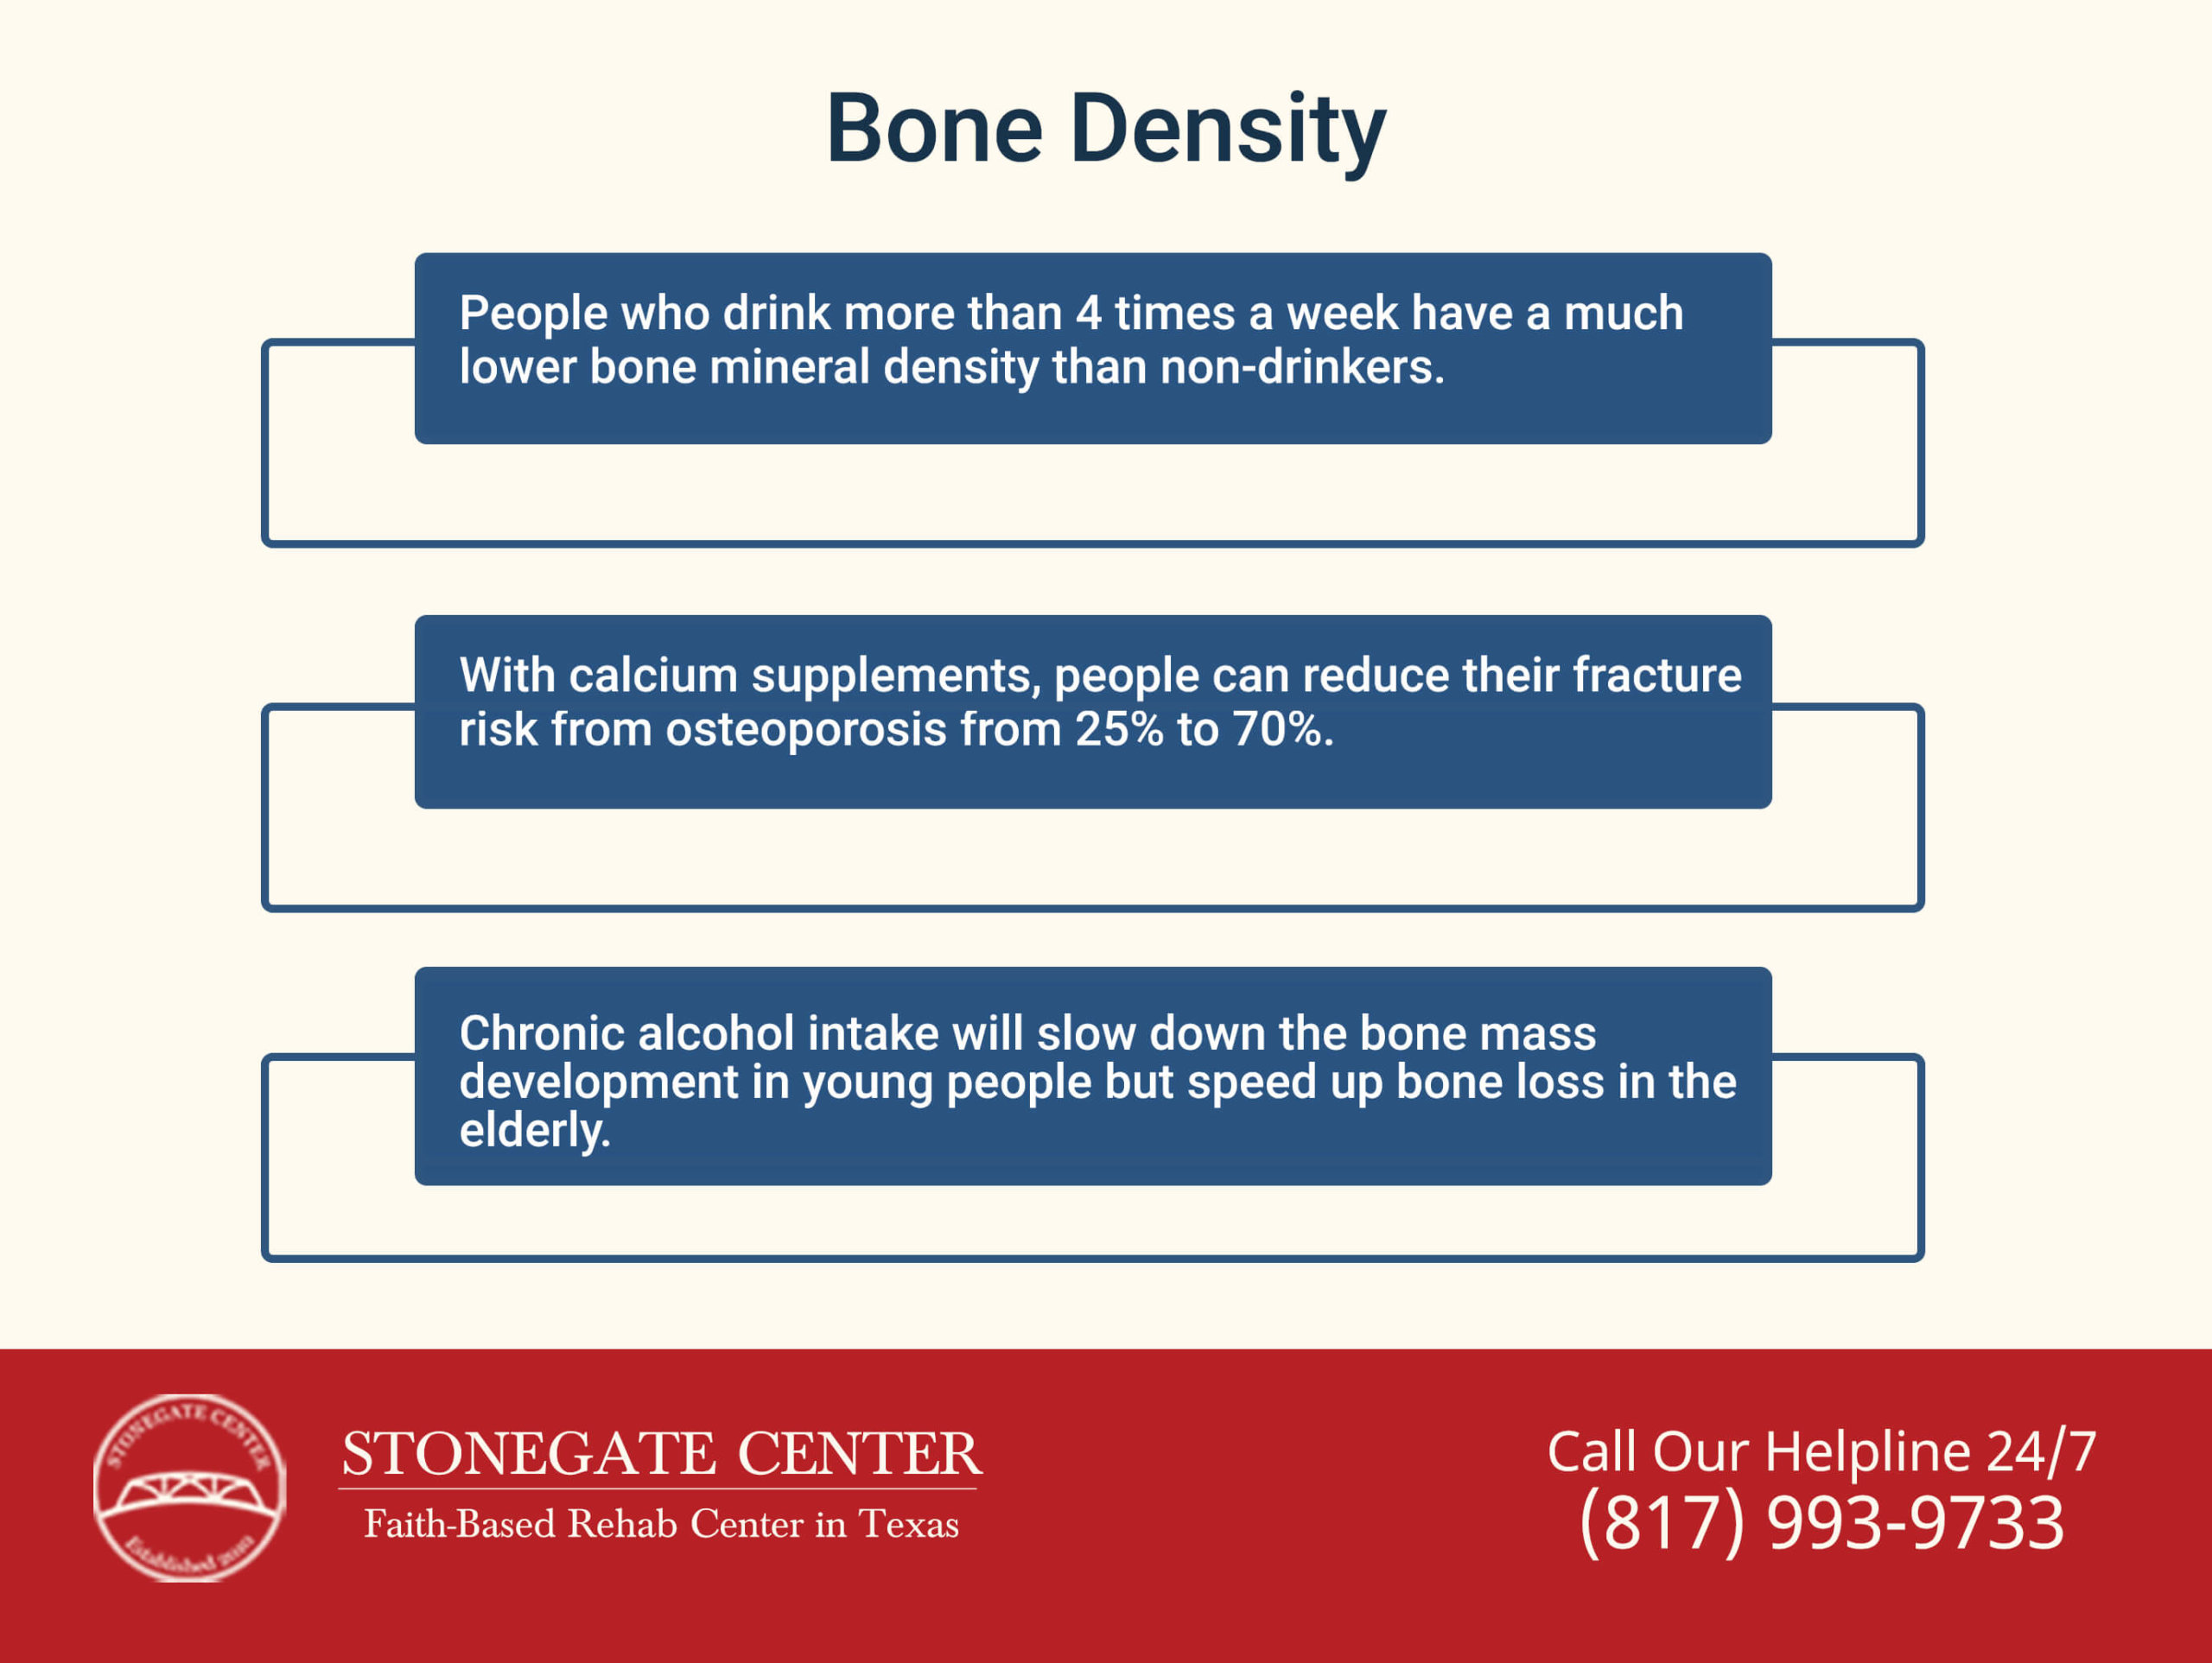 Stonegate Center Blog - You Should Consider Calcium Supplements If You're Recovering from Alcoholism - Bone Density Infographics